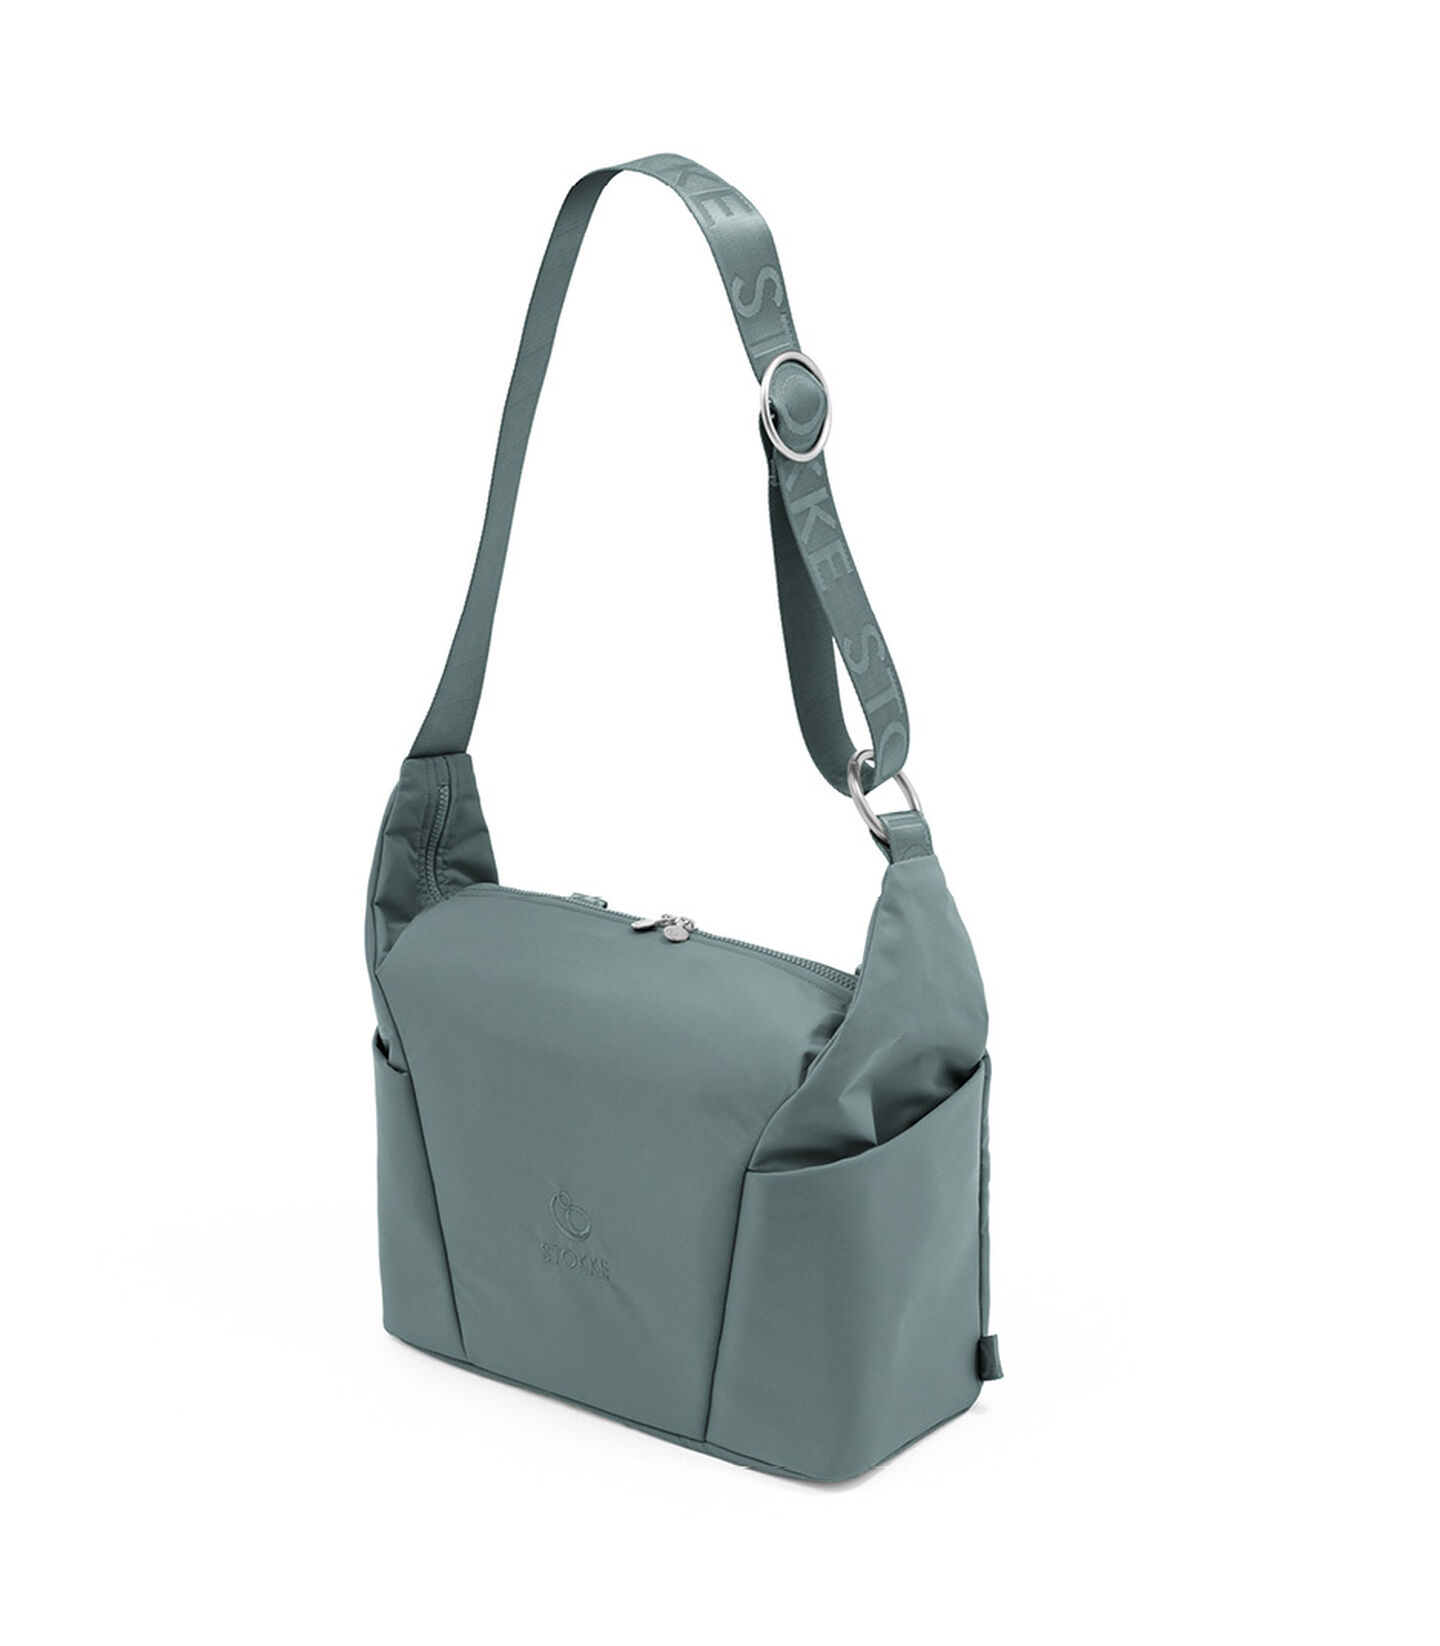 Stokke® Xplory® X Changing bag Cool Teal, Cool Teal, mainview view 2